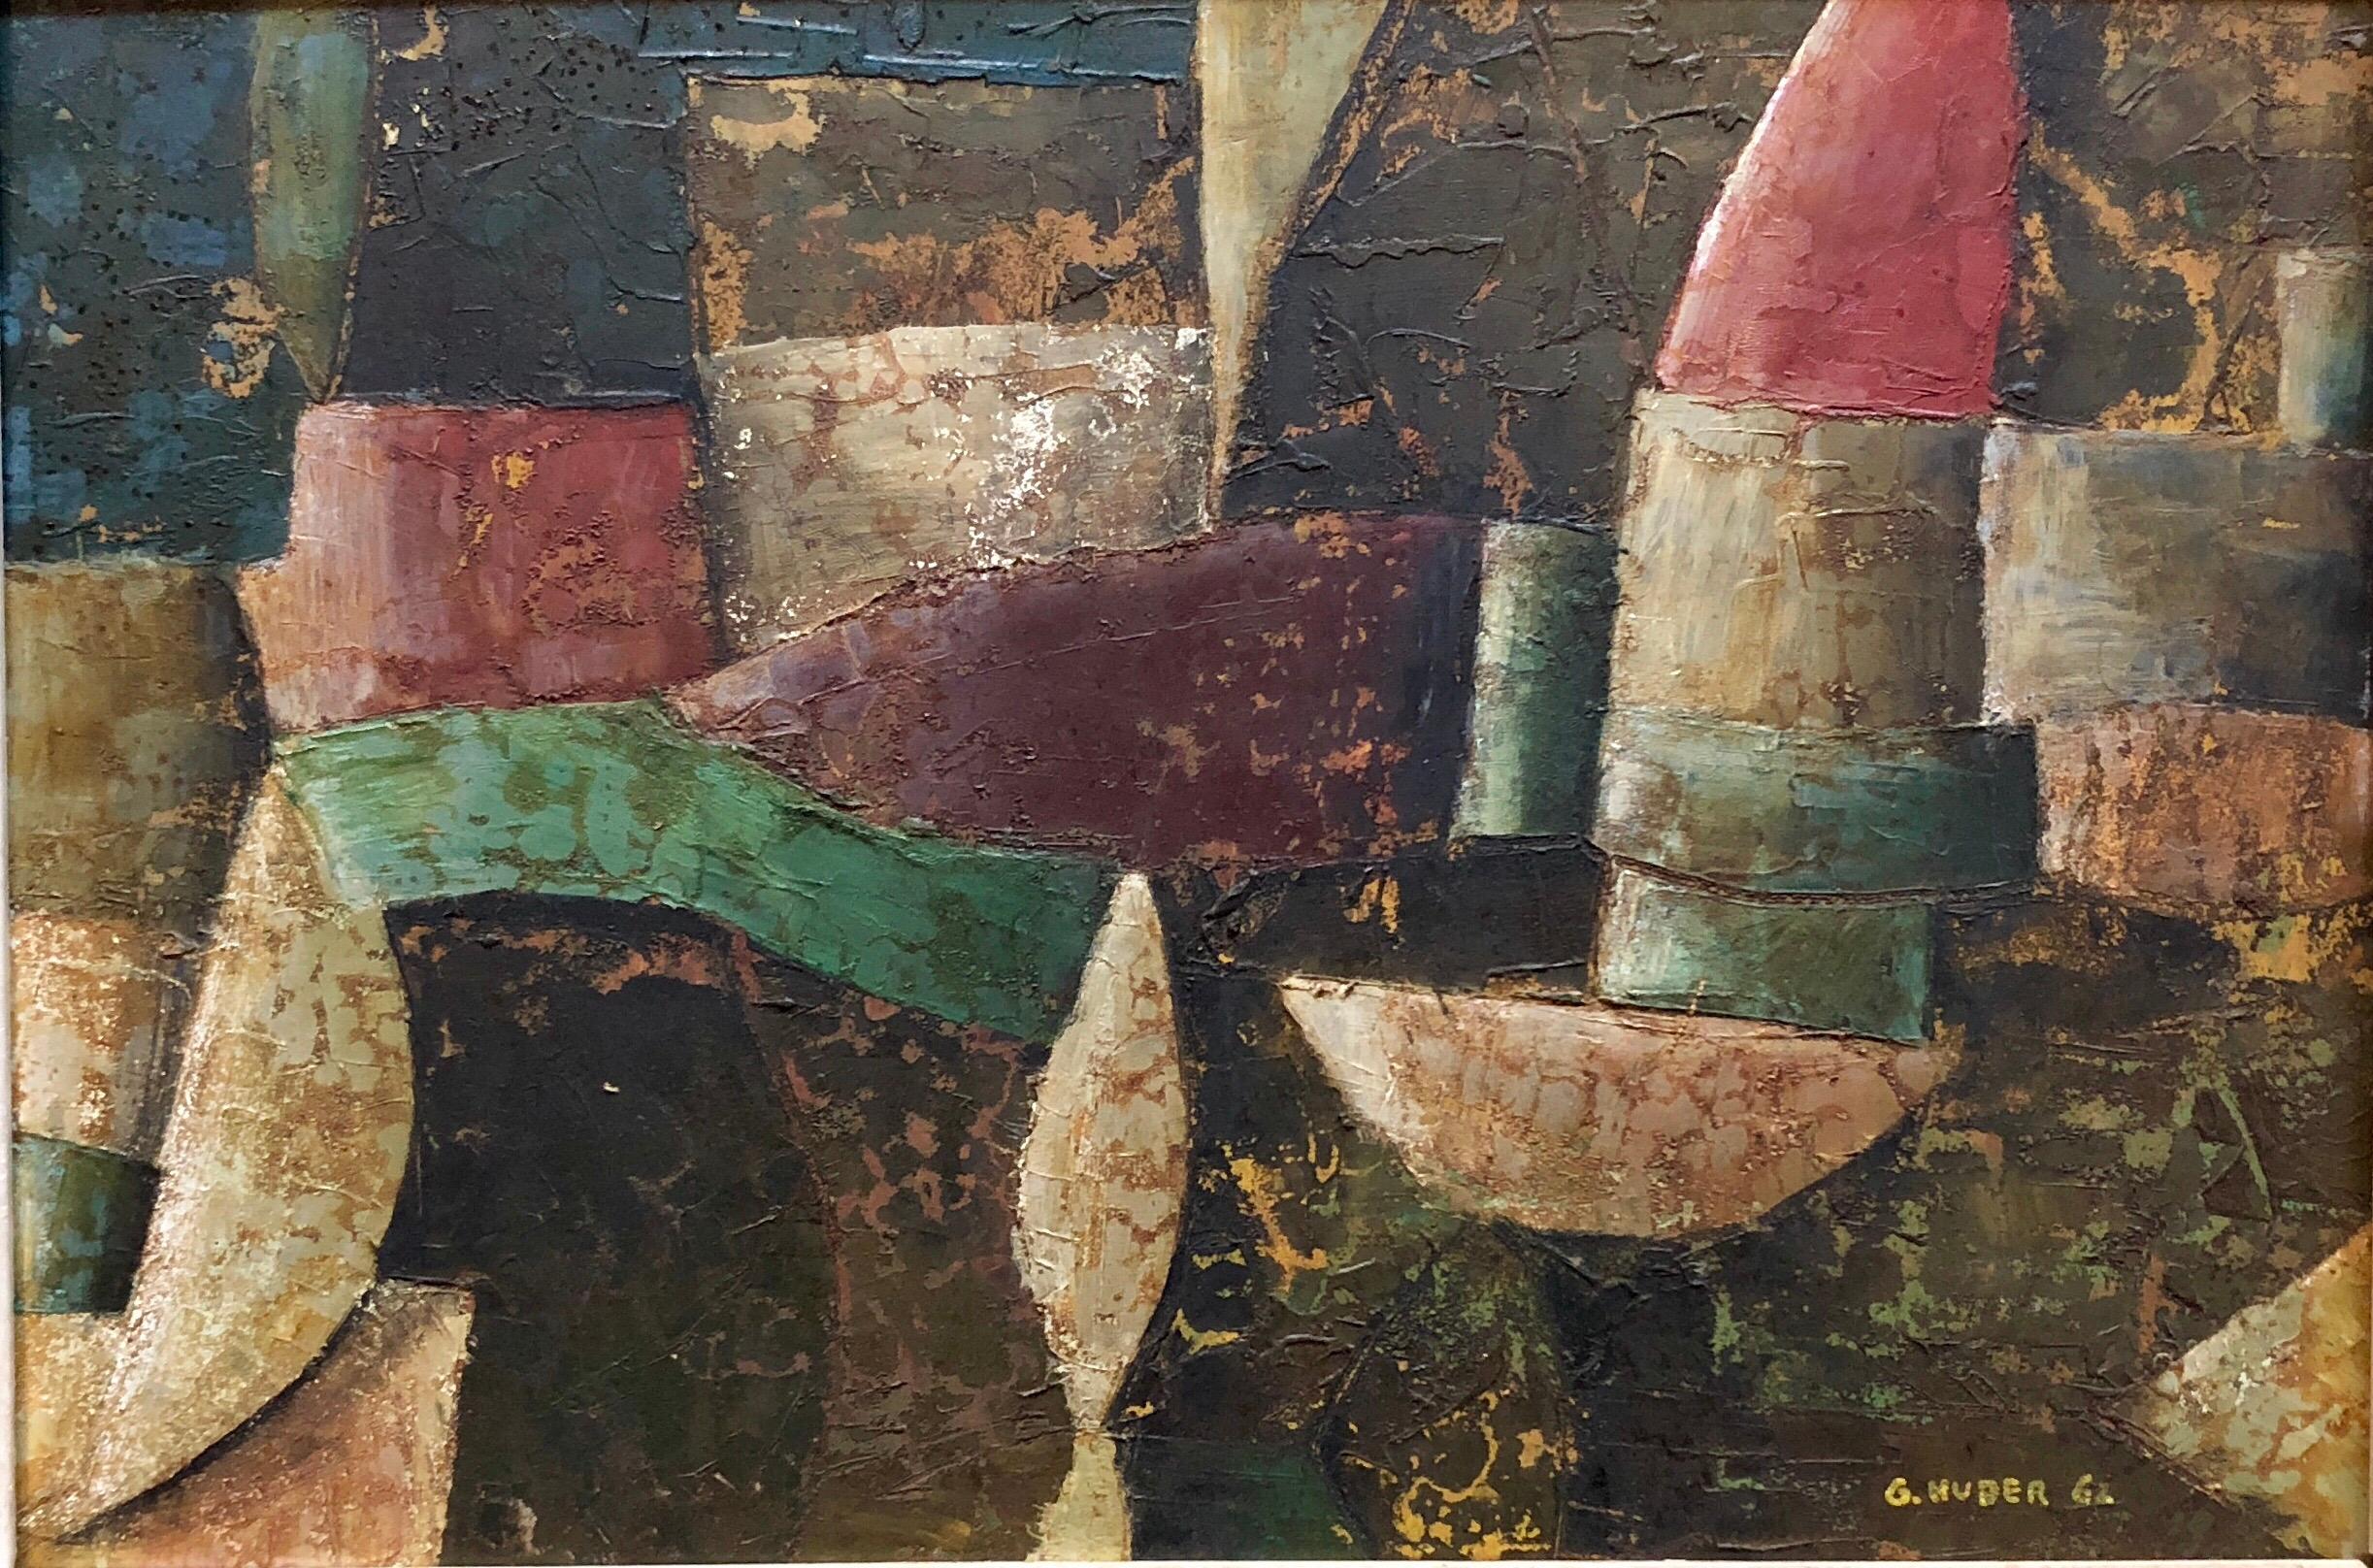 Giovanni Huber Abstract Painting - 1960s Italian Futurist Abstract Oil Painting